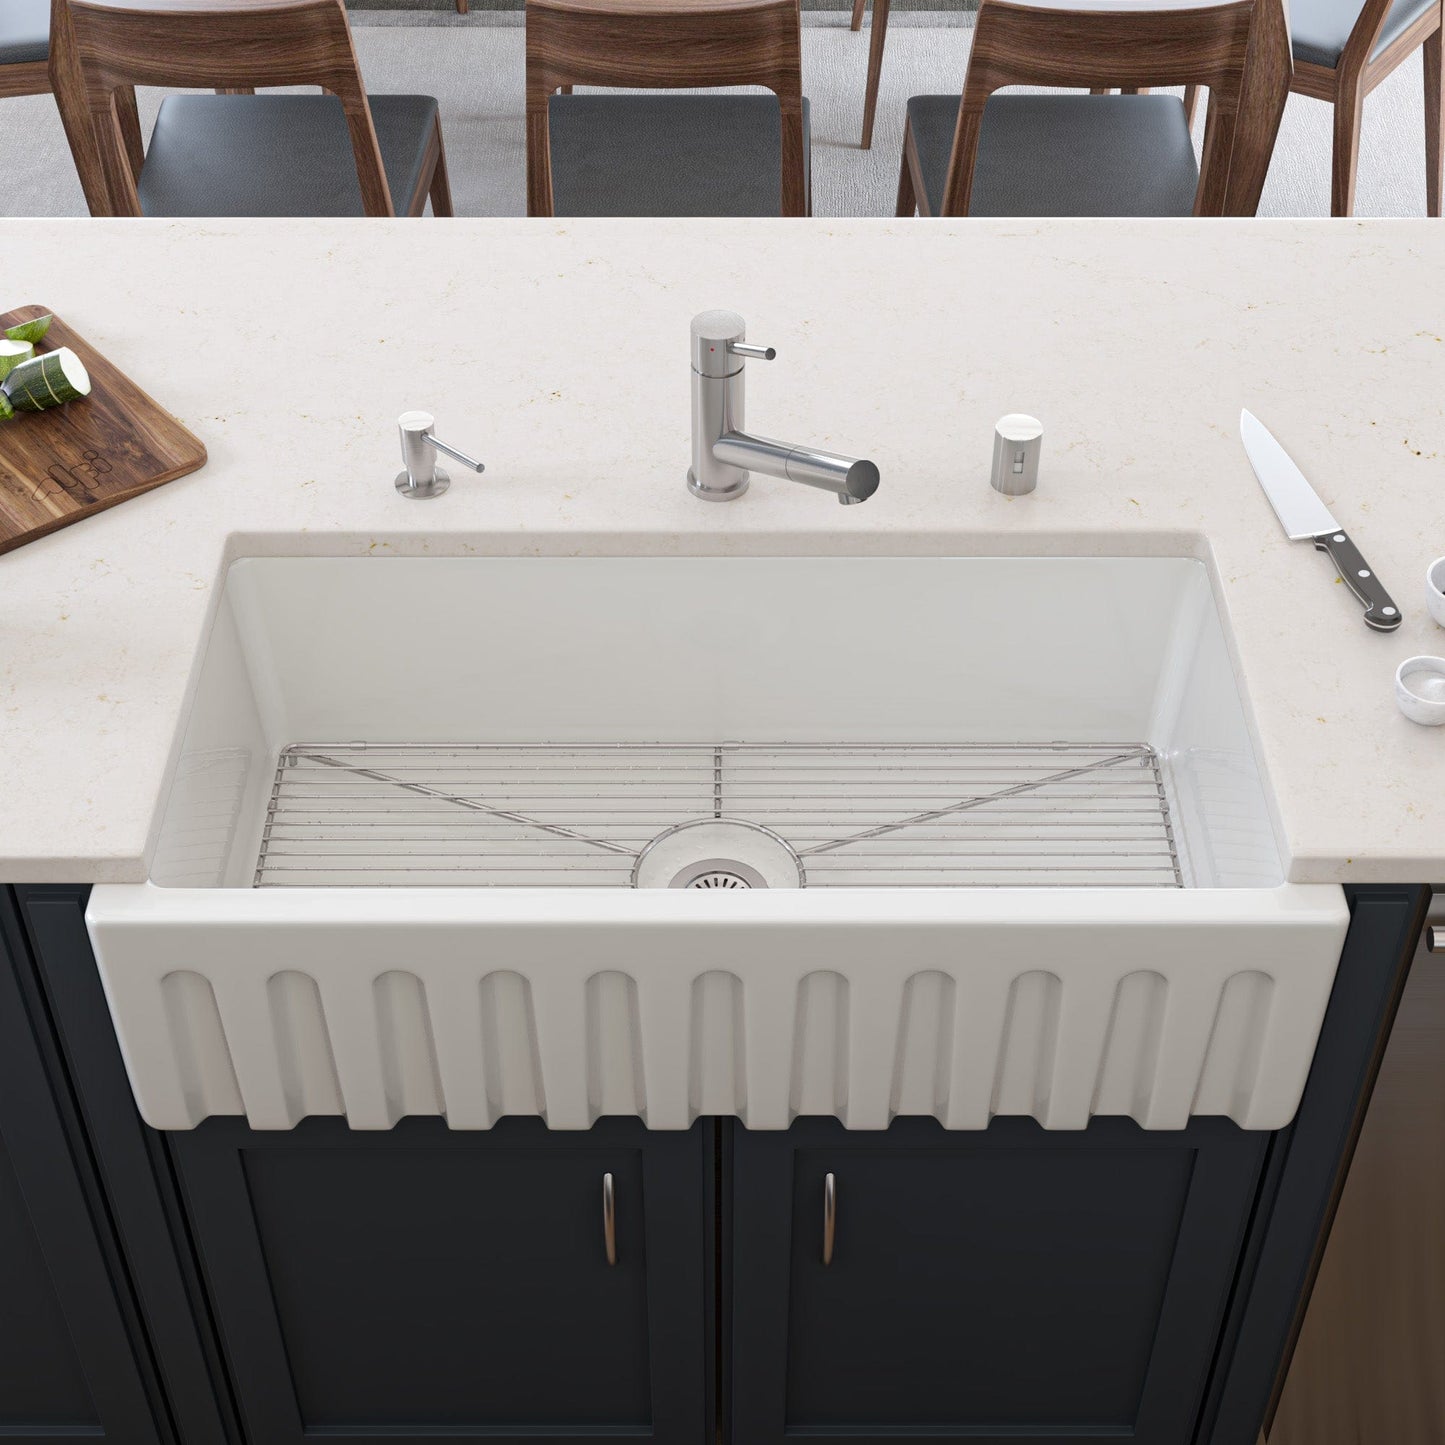 ALFI 36" White Reversible Smooth / Fluted Single Bowl Fireclay Farm Sink AB3618HS-W